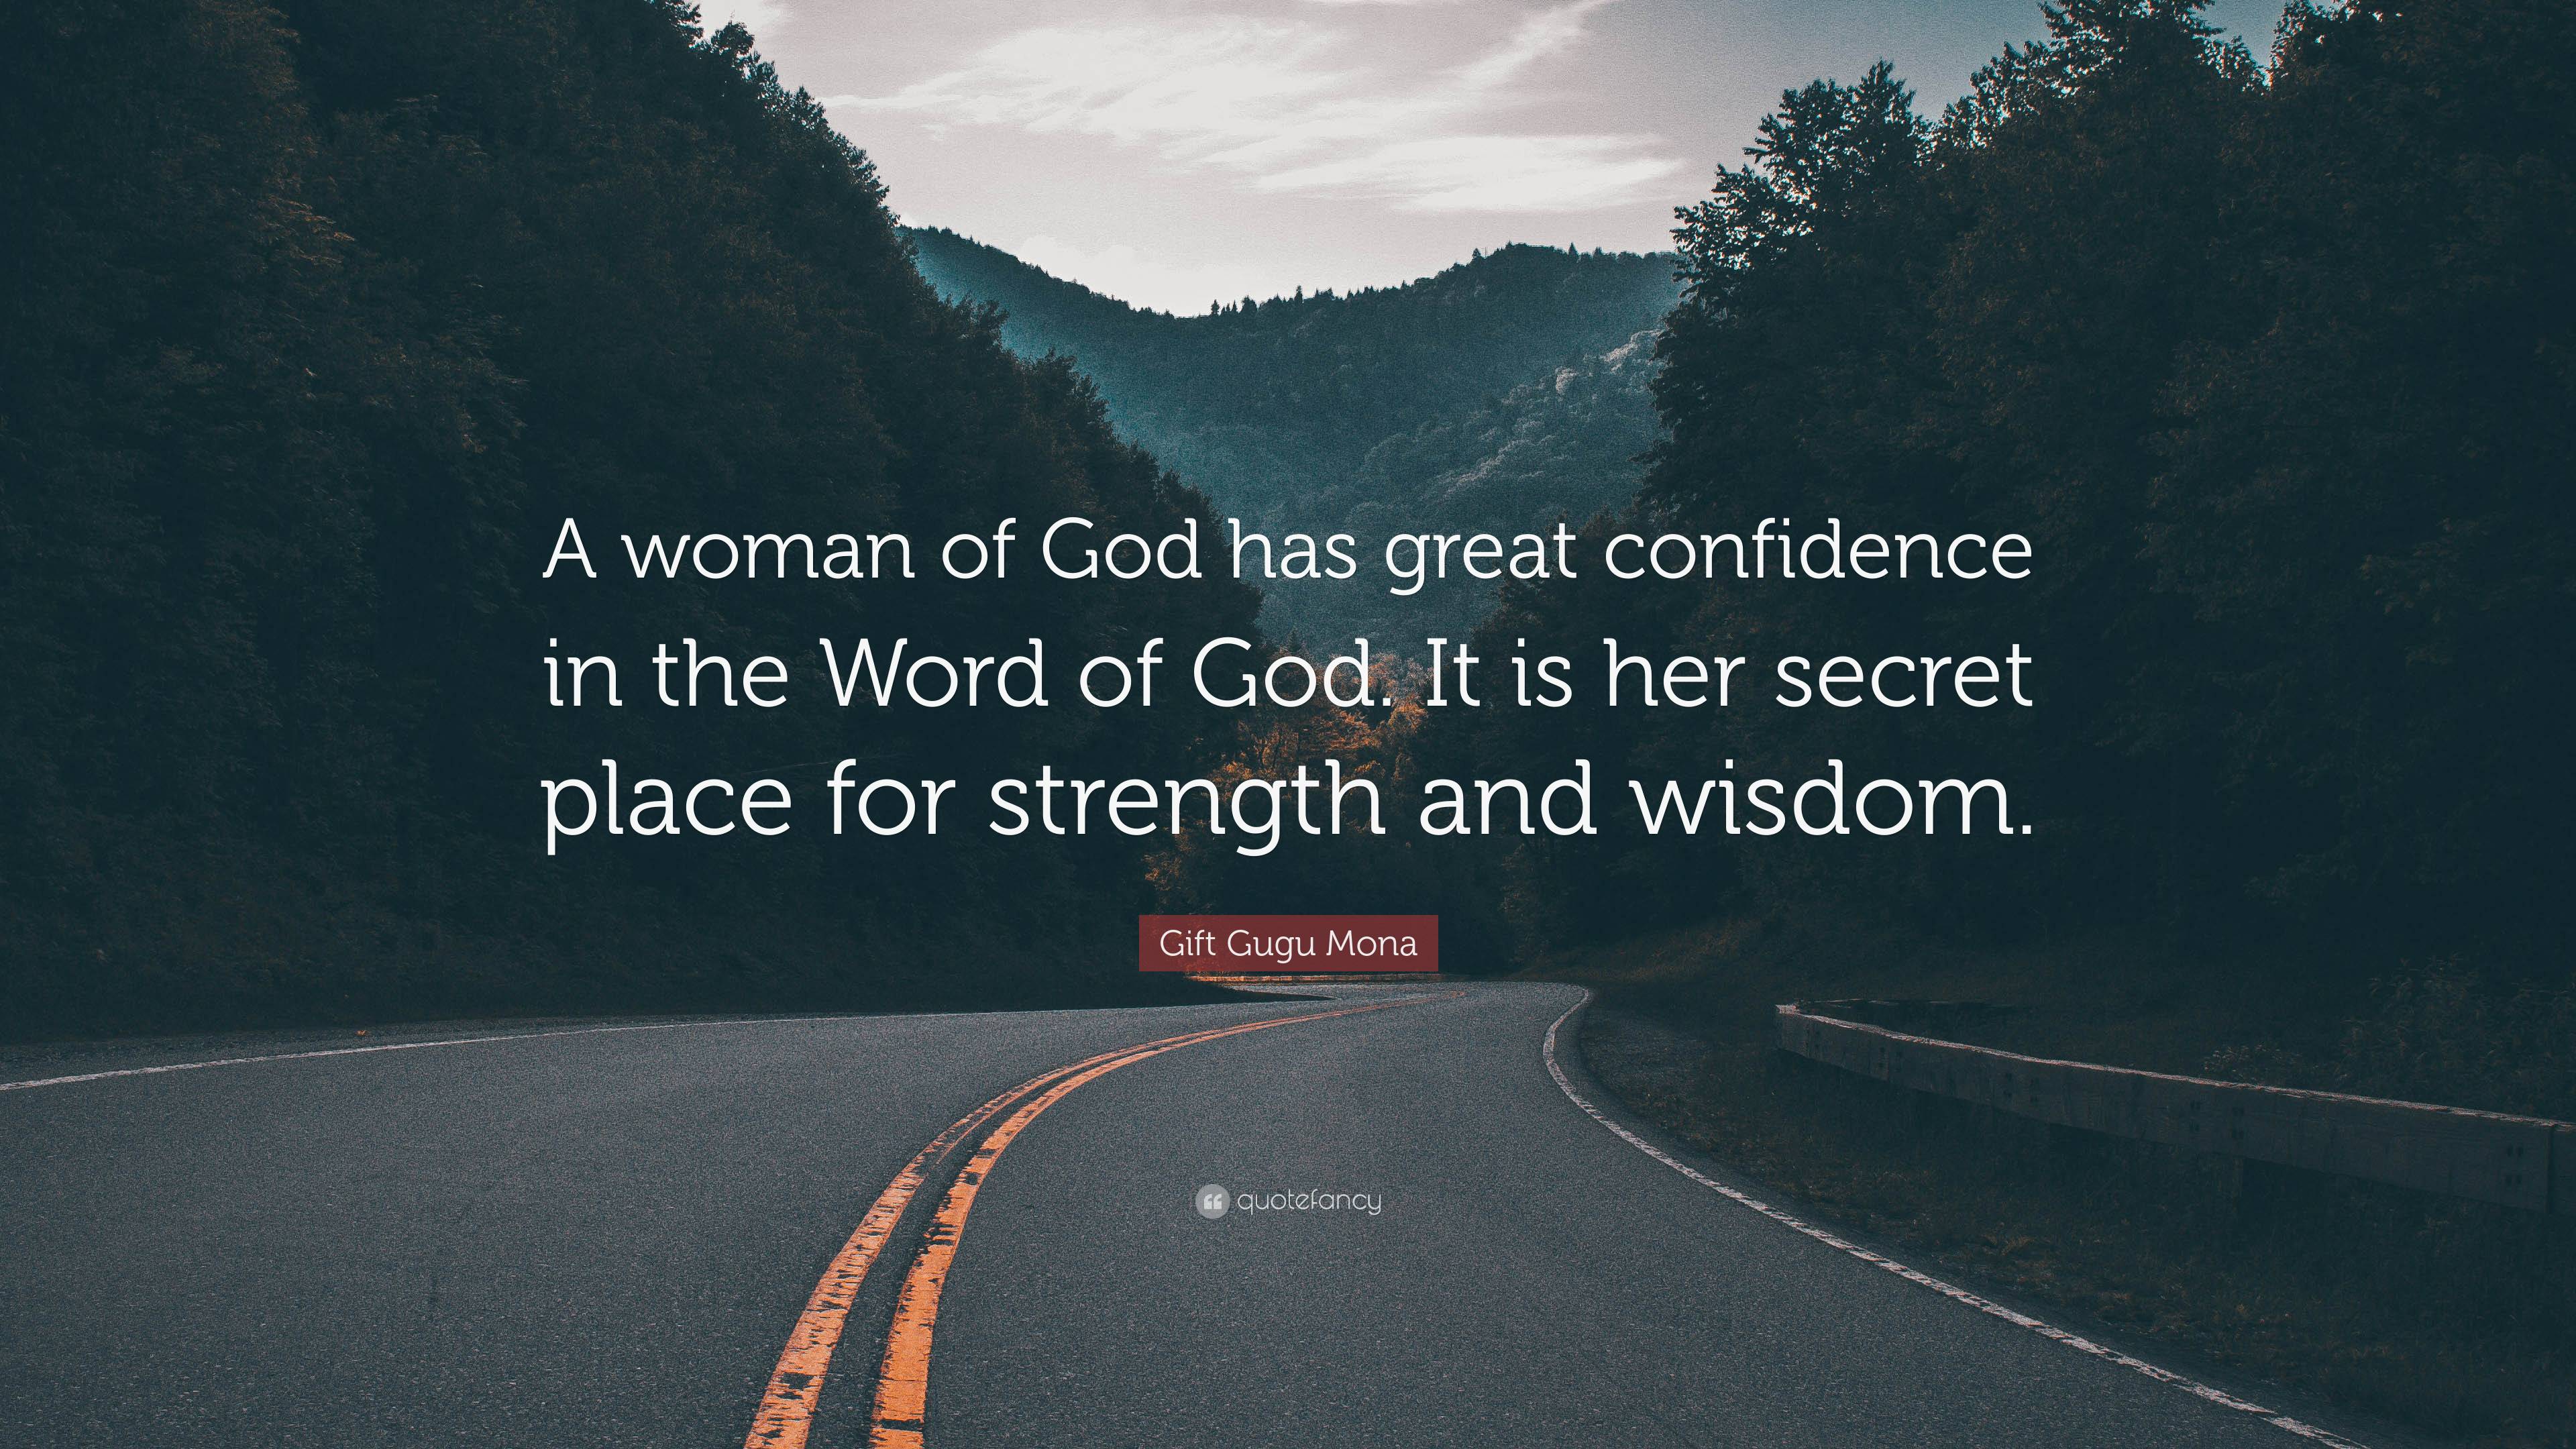 Gift Gugu Mona Quote: “A woman of God is a Masterpiece, perfectly